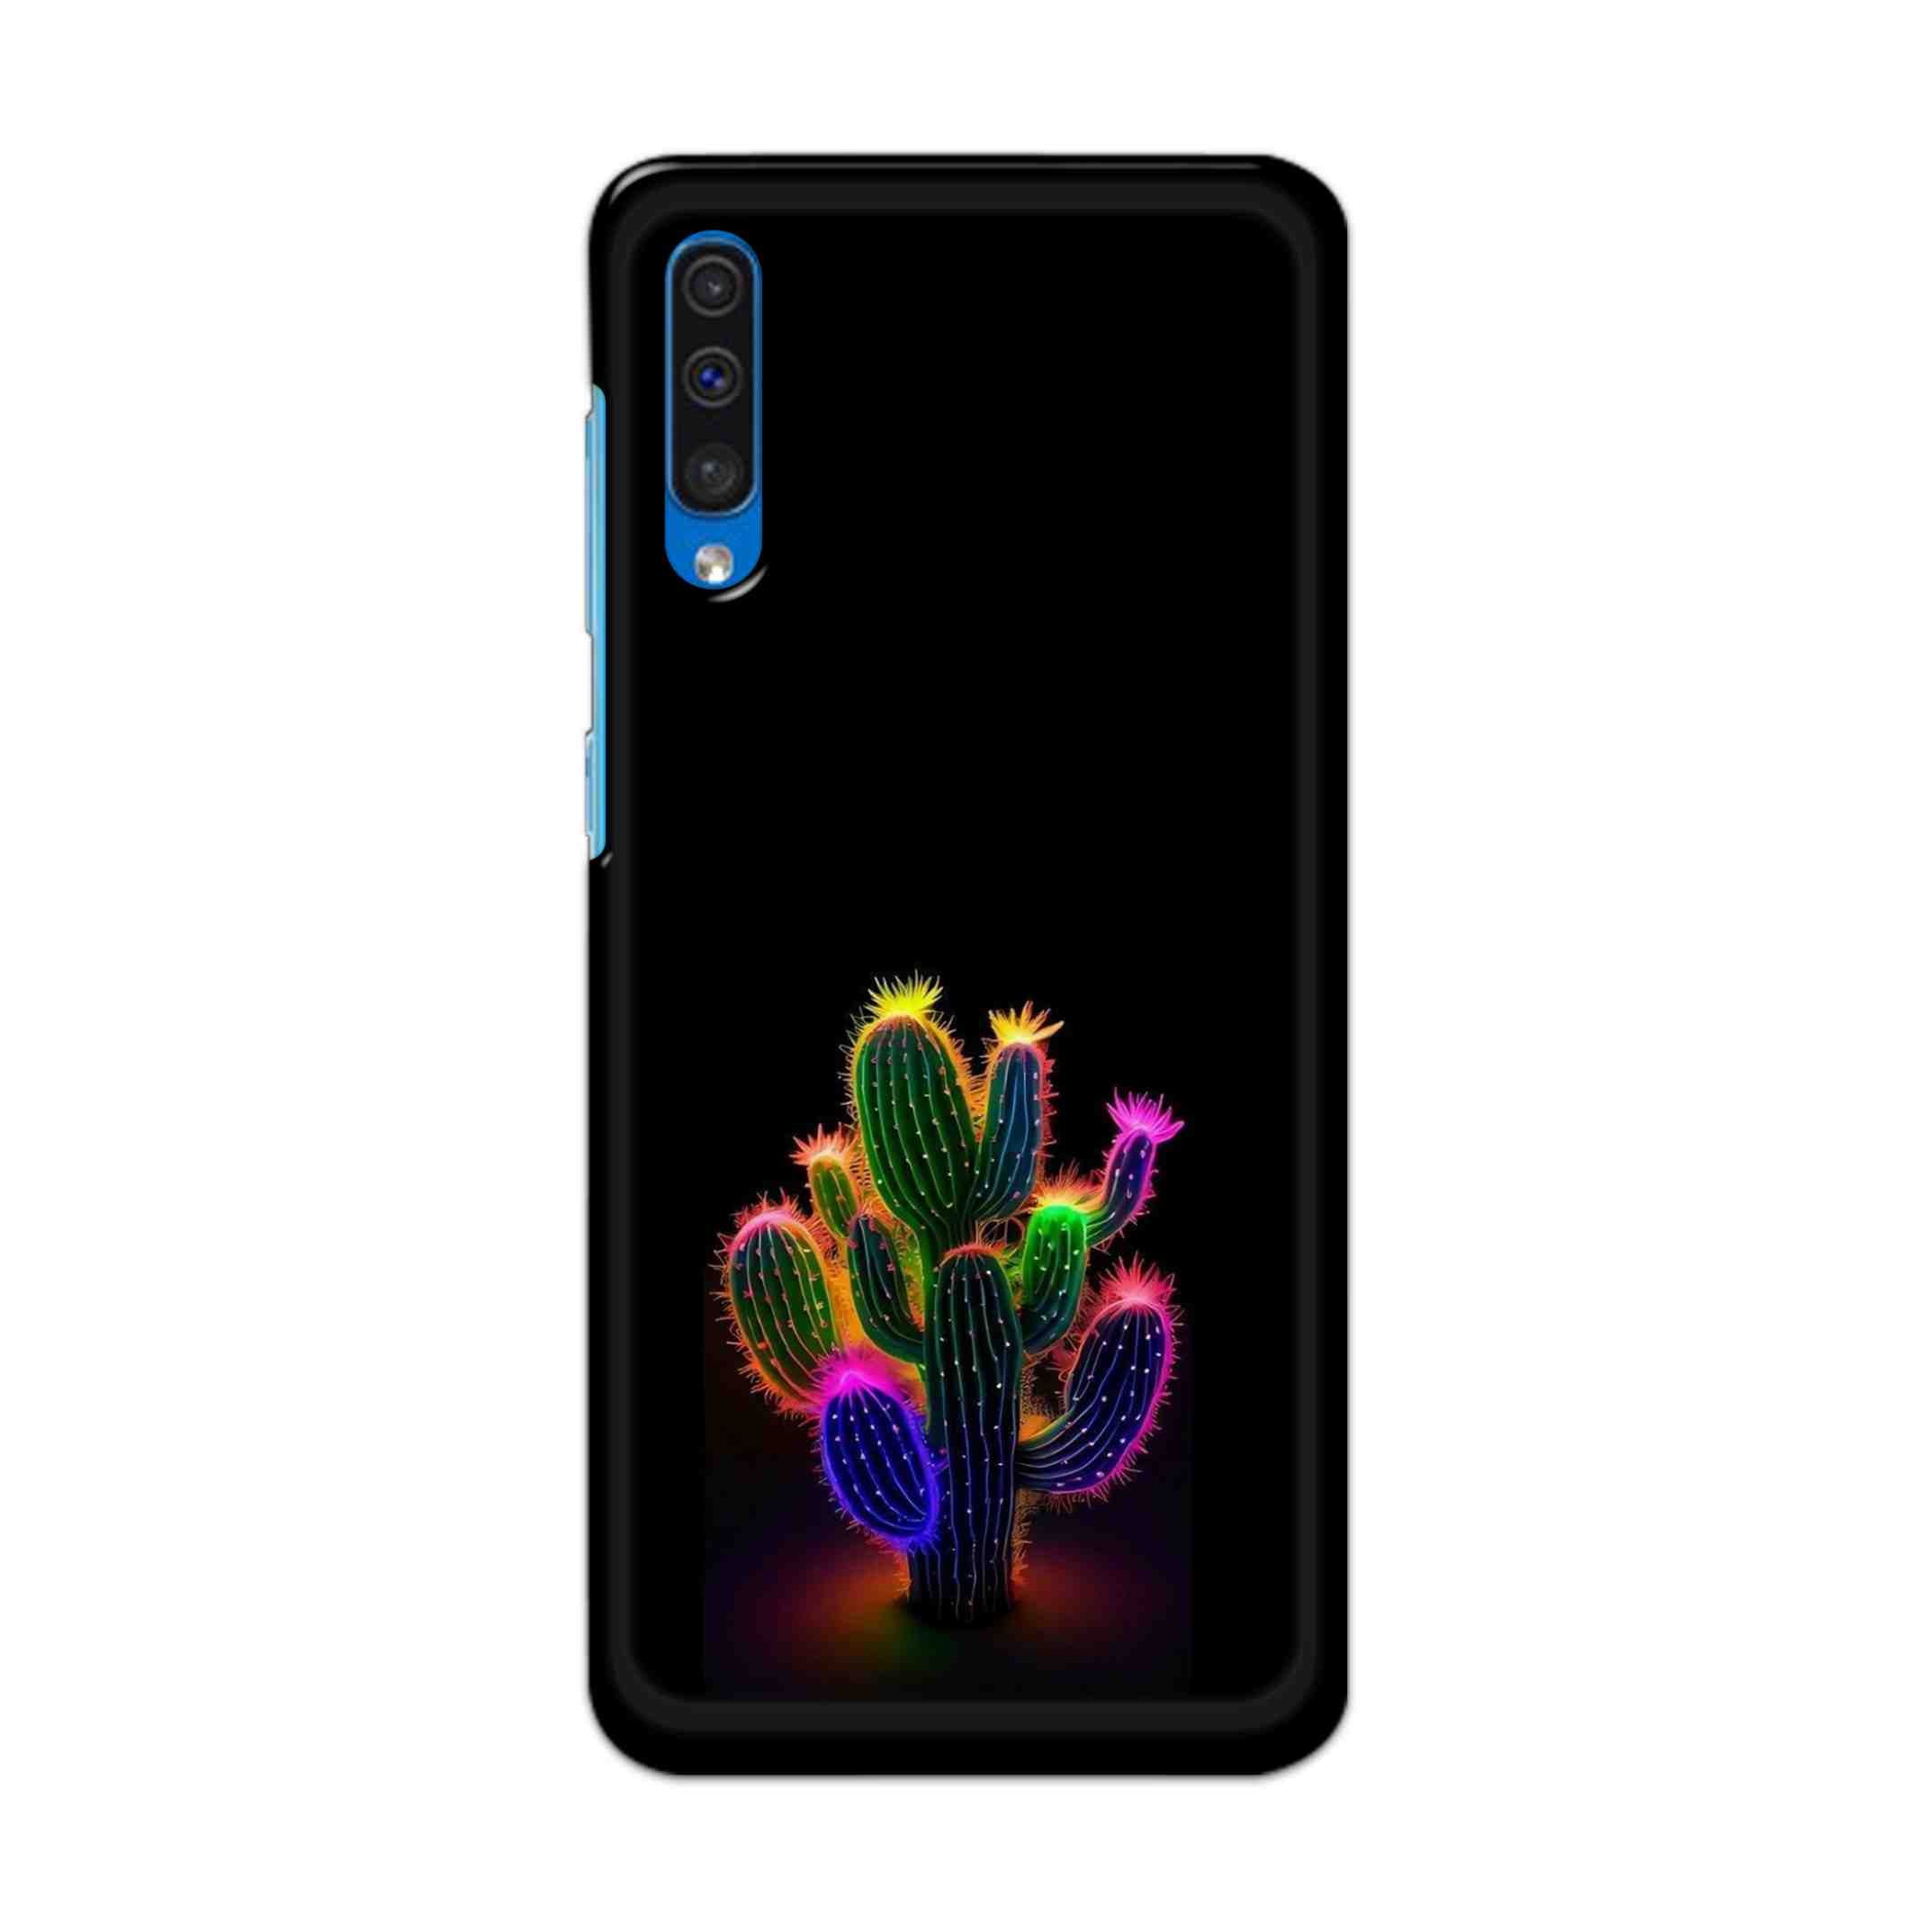 Buy Neon Flower Hard Back Mobile Phone Case Cover For Samsung Galaxy A50 / A50s / A30s Online